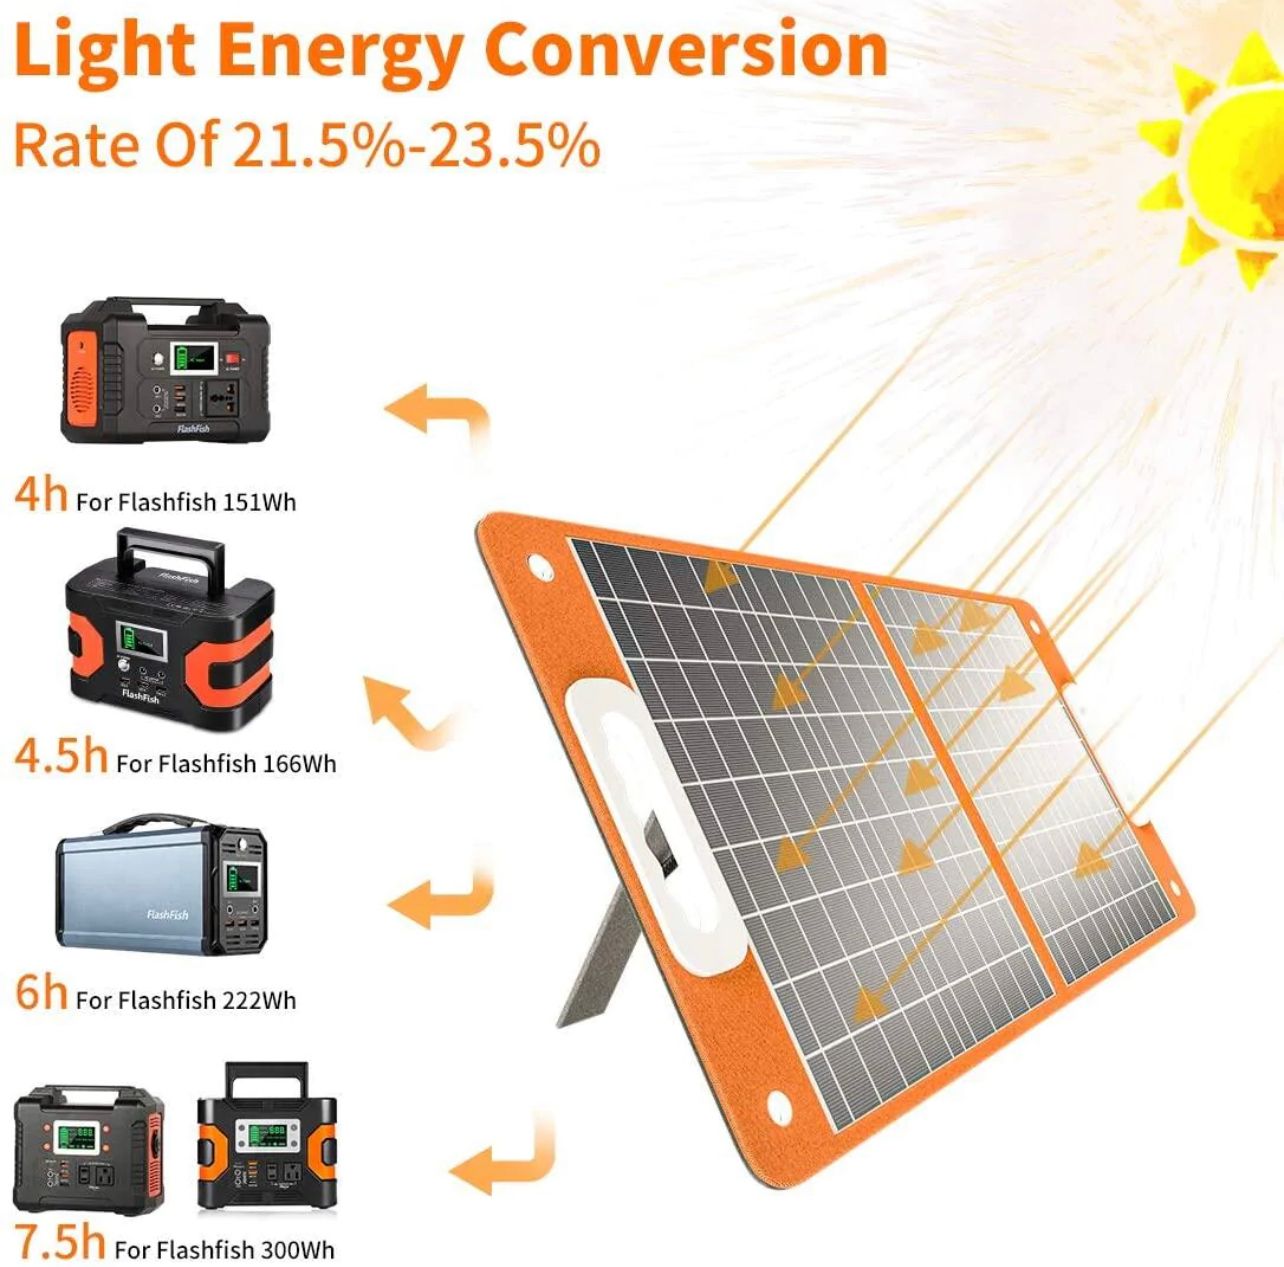 Flashfish/Gofort A201 Portable Power Station with 60W/18V Foldable Solar Panel